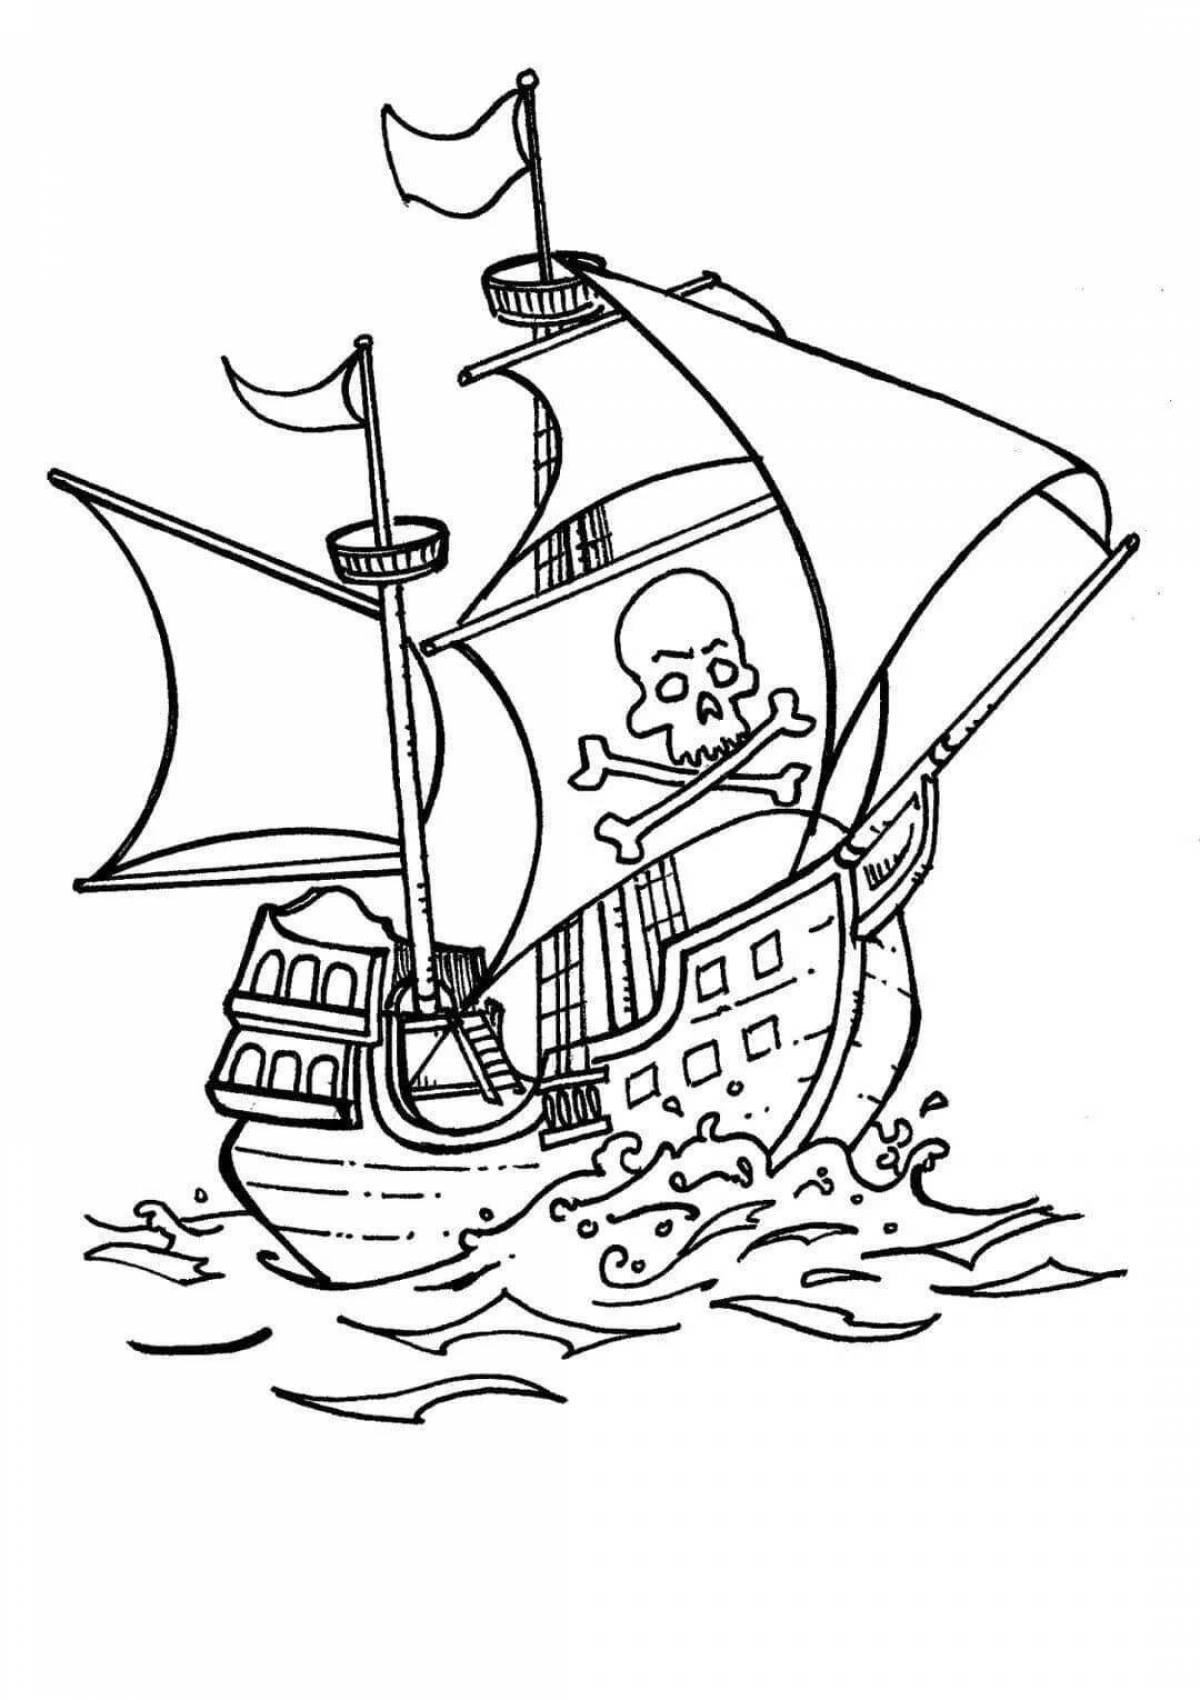 Playful pirate ship coloring page for kids